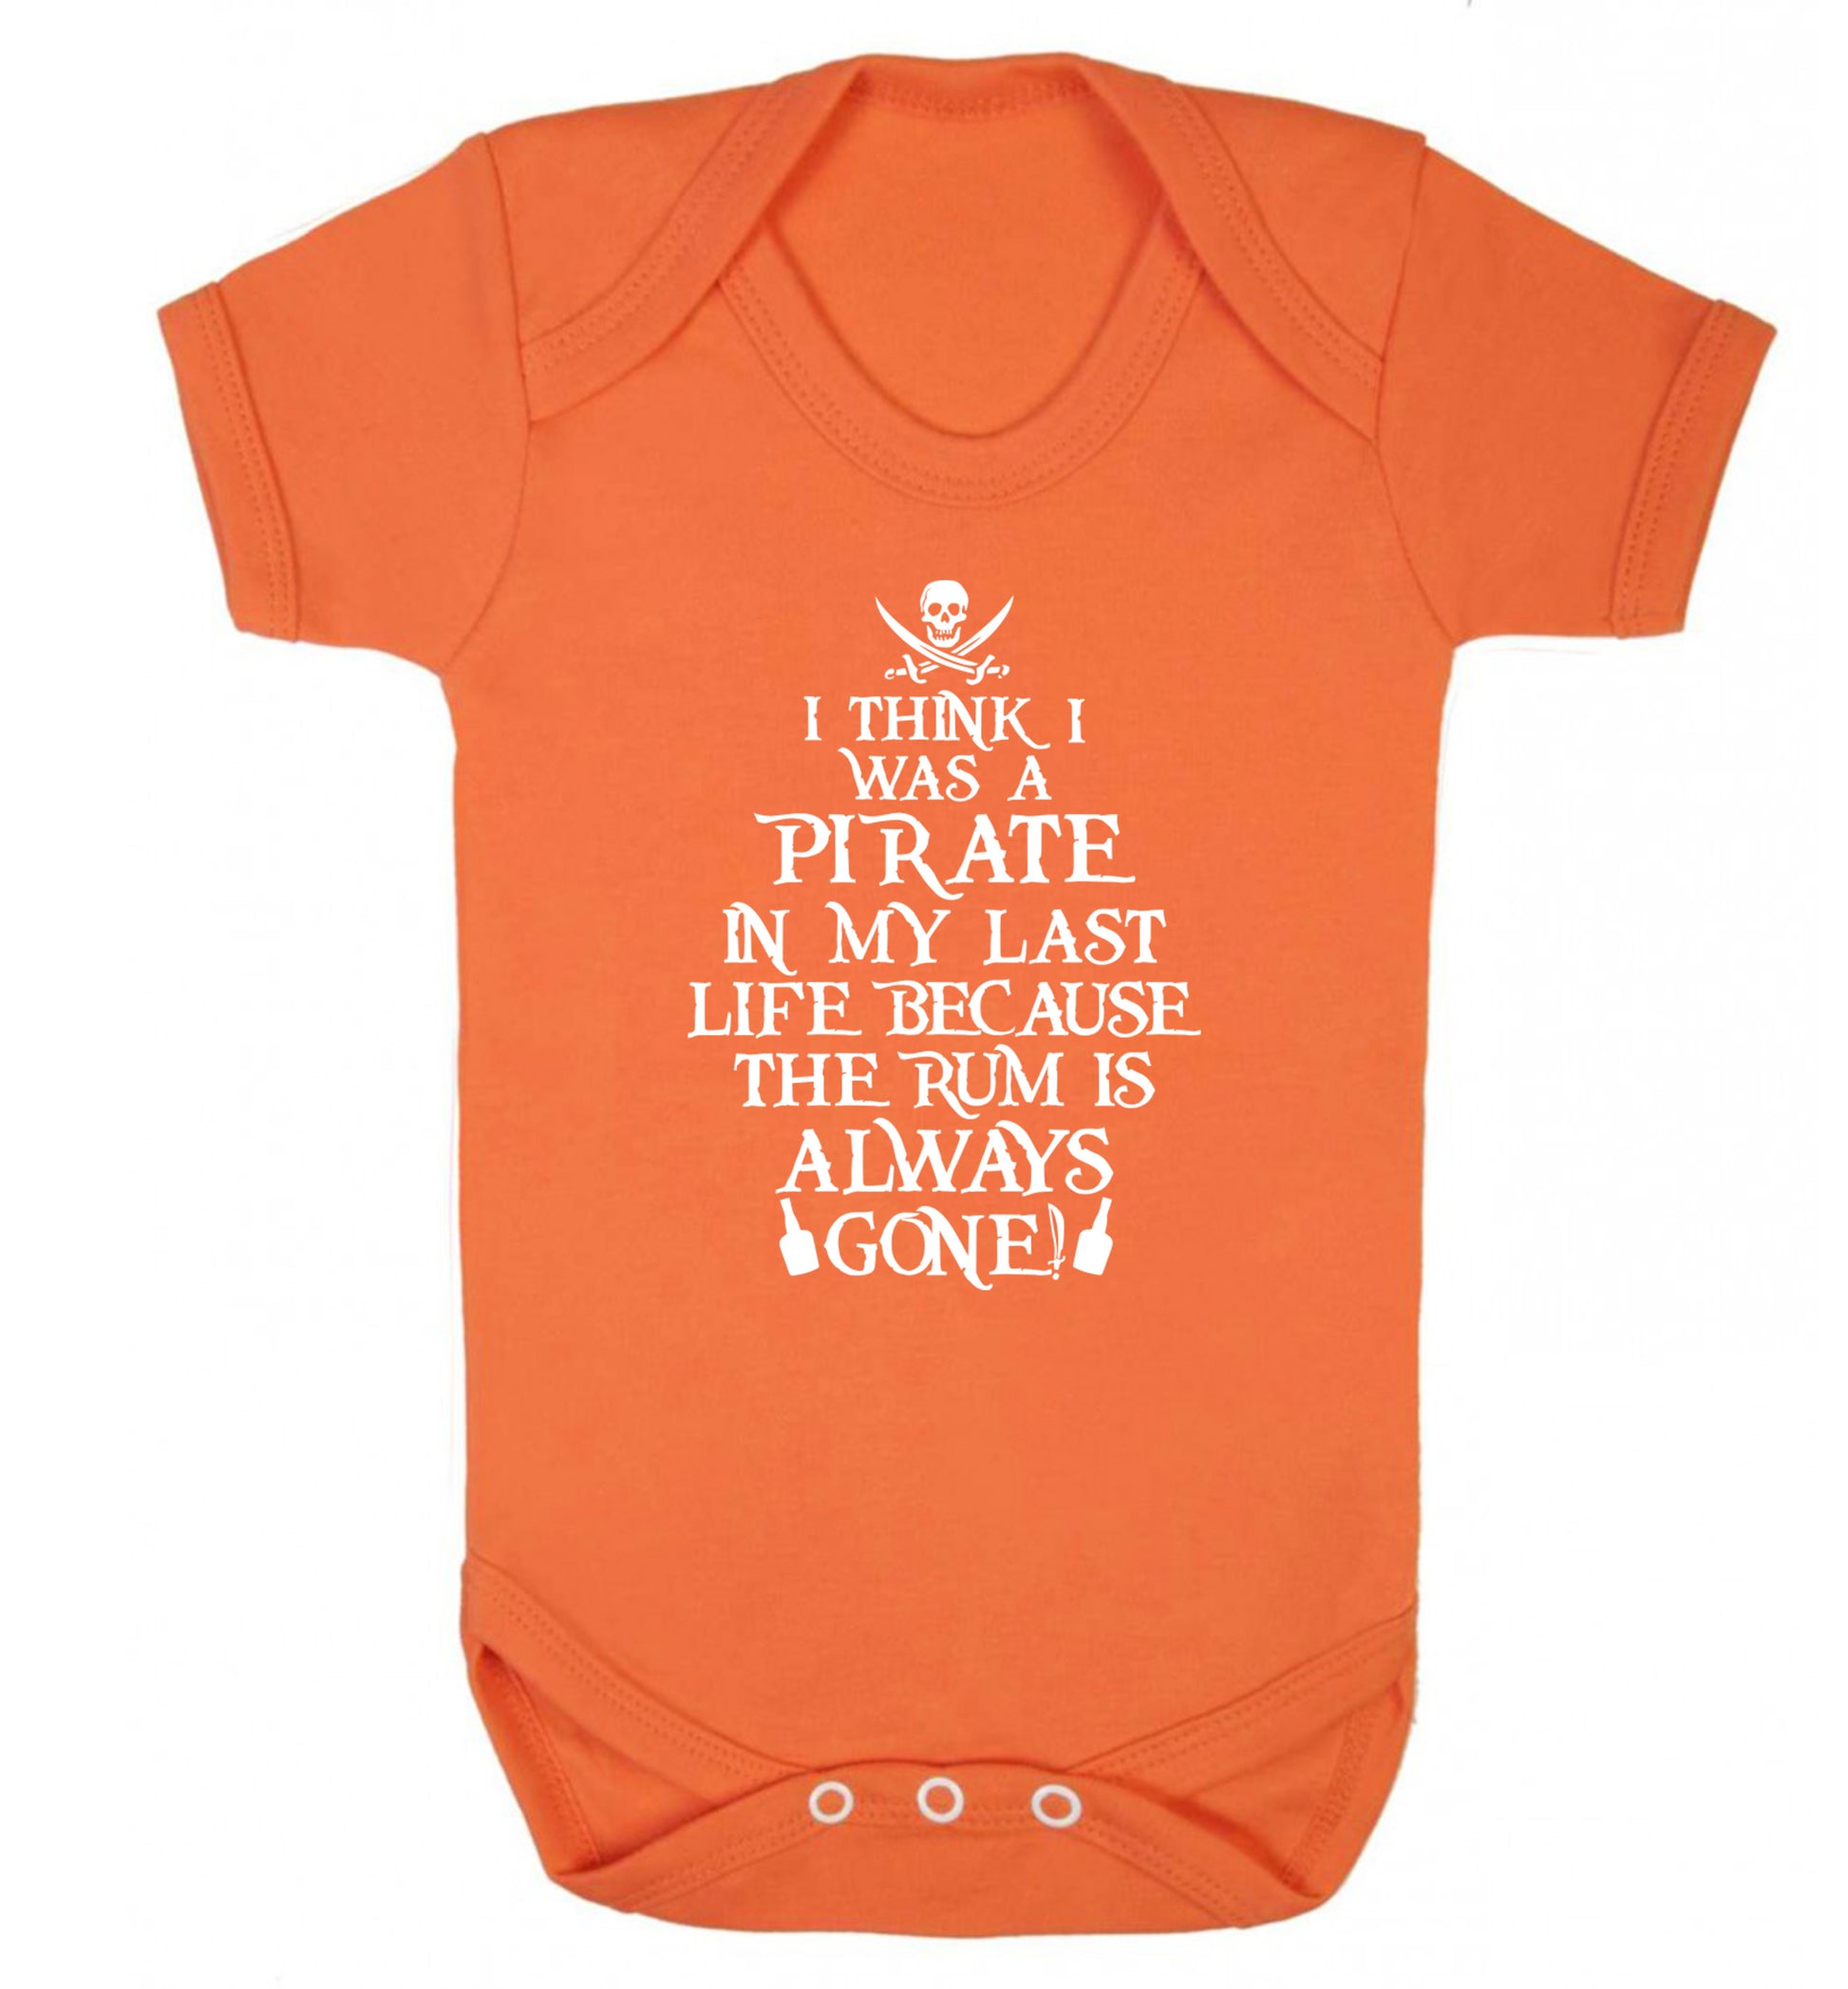 I think I was a pirate in my past life because the rum is always gone! Baby Vest orange 18-24 months